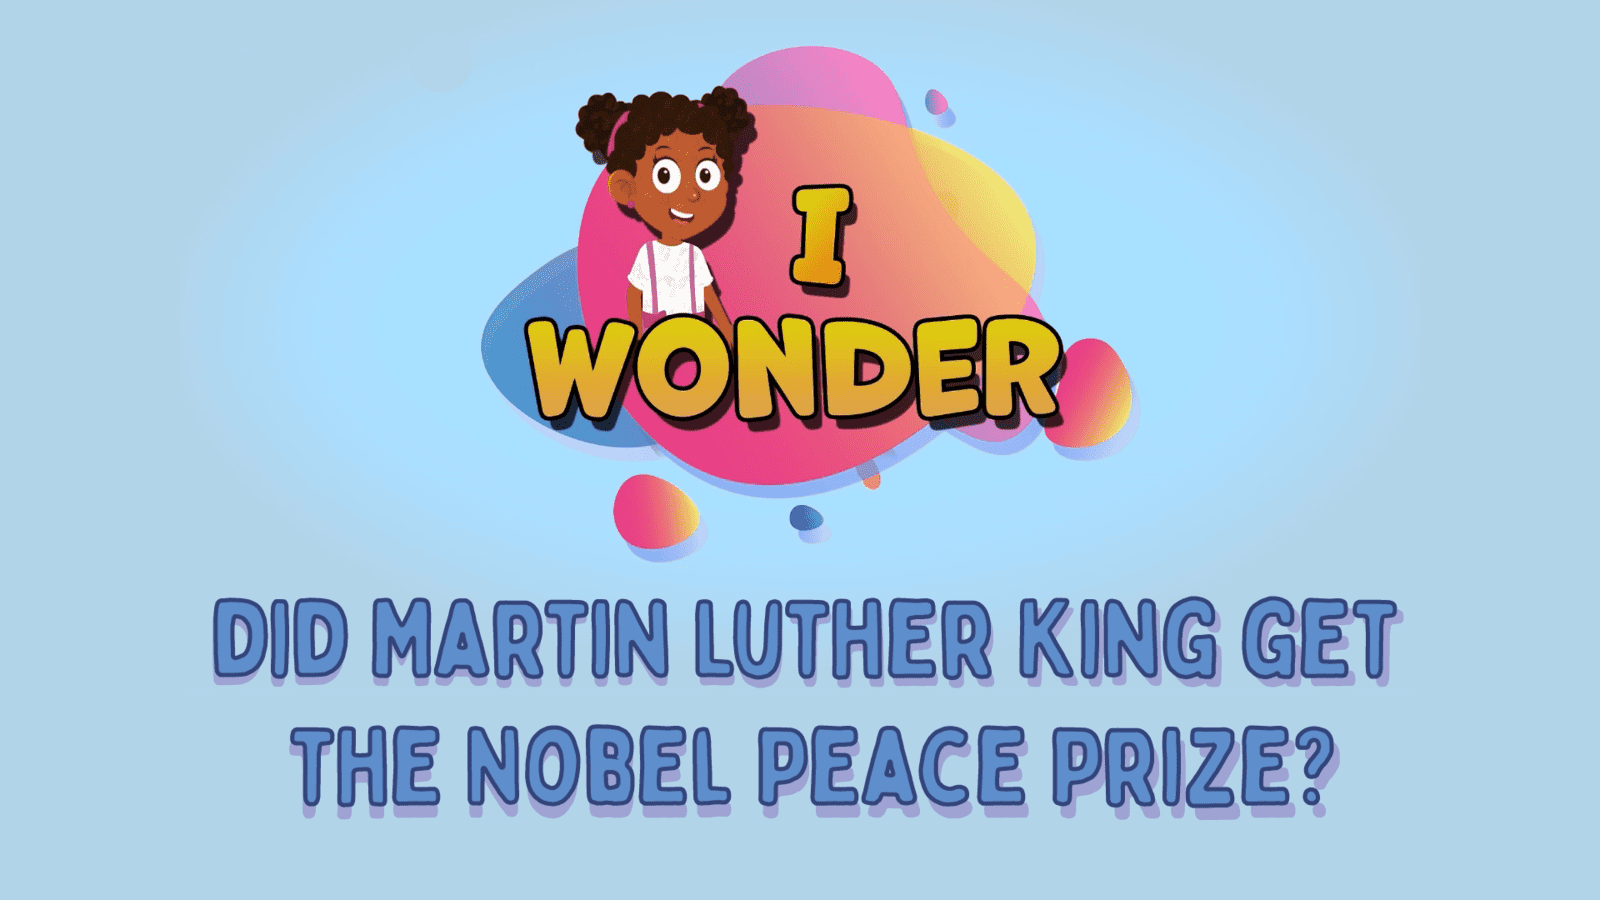 Did Martin Luther King Get The Nobel Peace Prize?